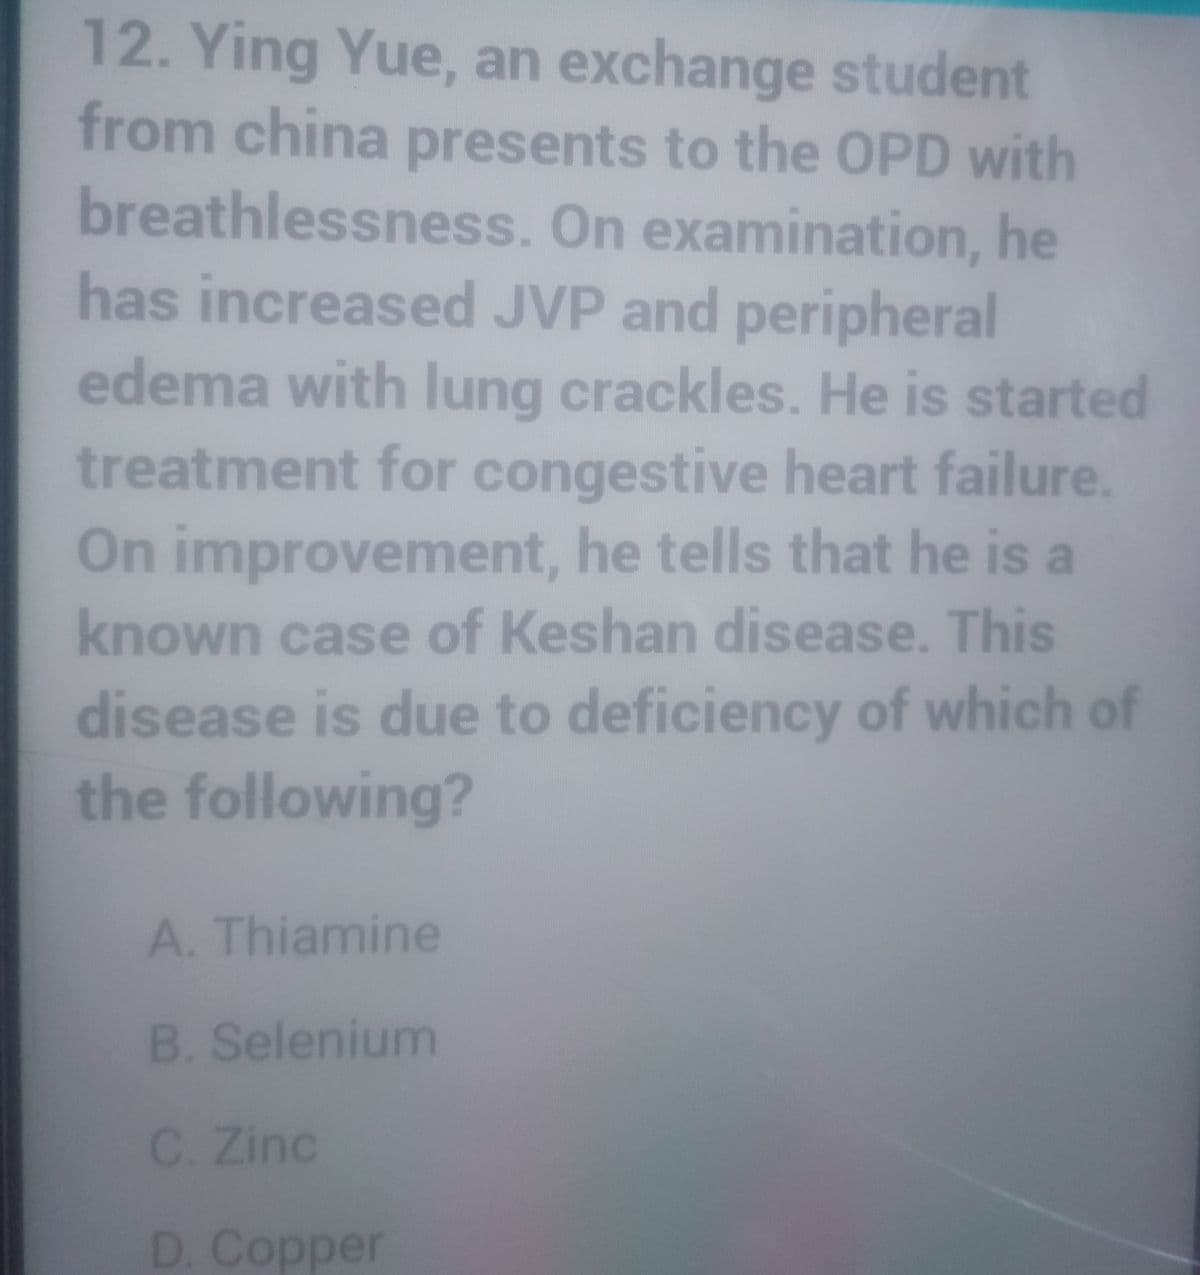 12. Ying Yue, an exchange student
from china presents to the OPD with
breathlessness. On examination, he
has increased JVP and peripheral
edema with lung crackles. He is started
treatment for congestive heart failure.
On improvement, he tells that he is a
known case of Keshan disease. This
disease is due to deficiency of which of
the following?
A. Thiamine
B. Selenium
C. Zinc
D. Copper
